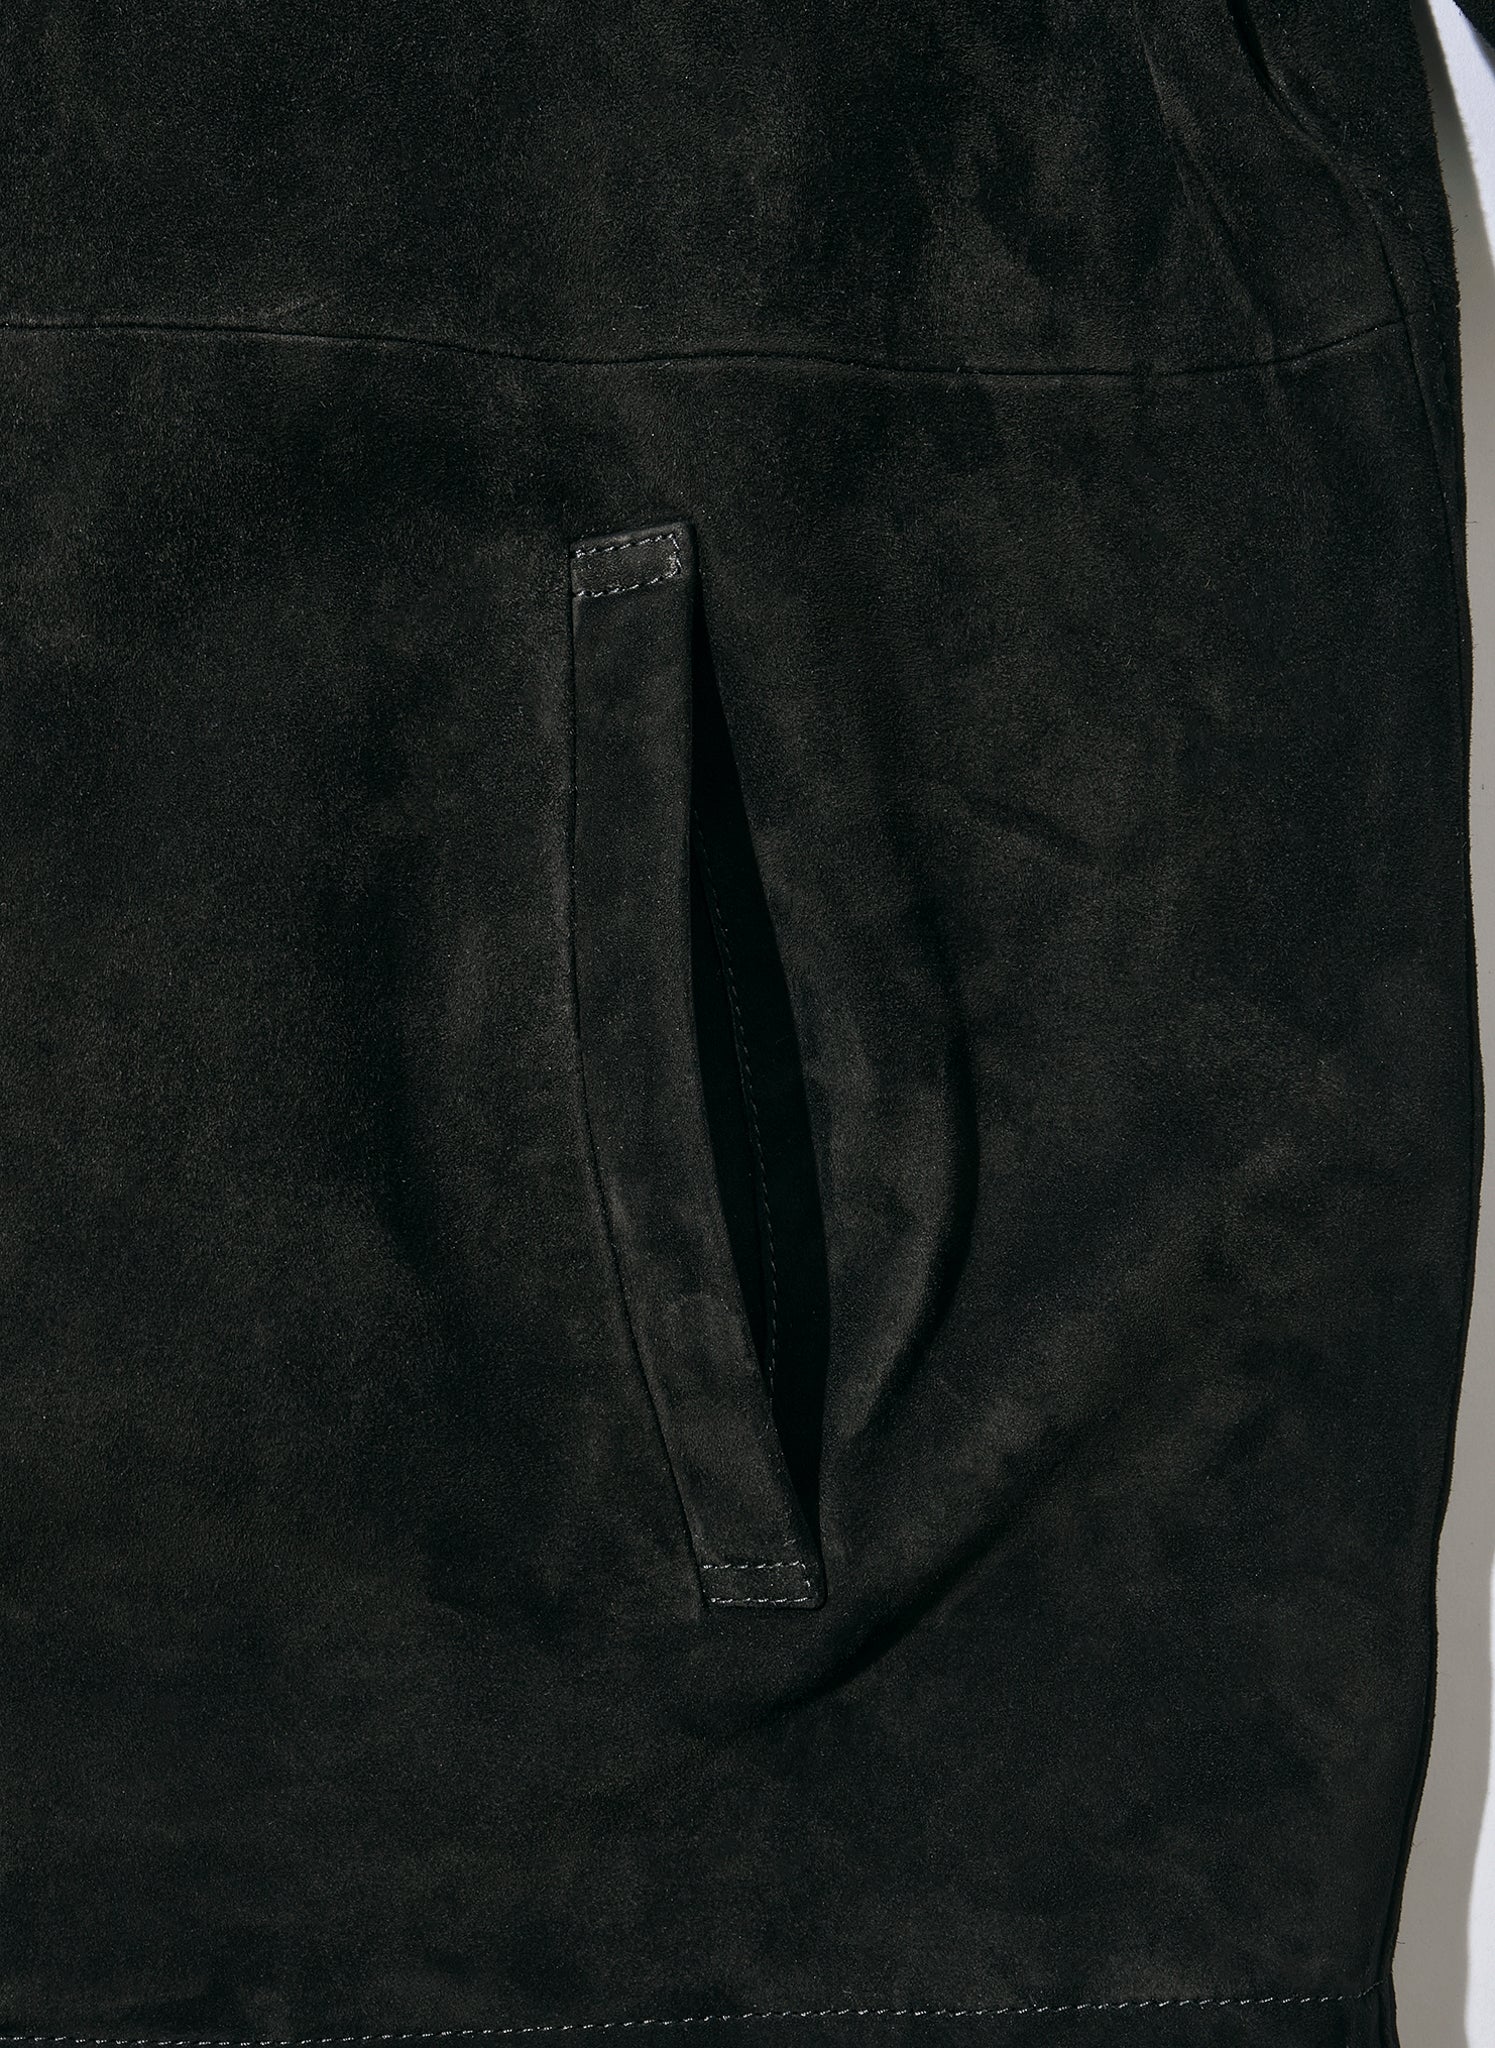 WILLY CHAVARRIA / COACH JACKET BLACK CALF SUEDE LEATHER